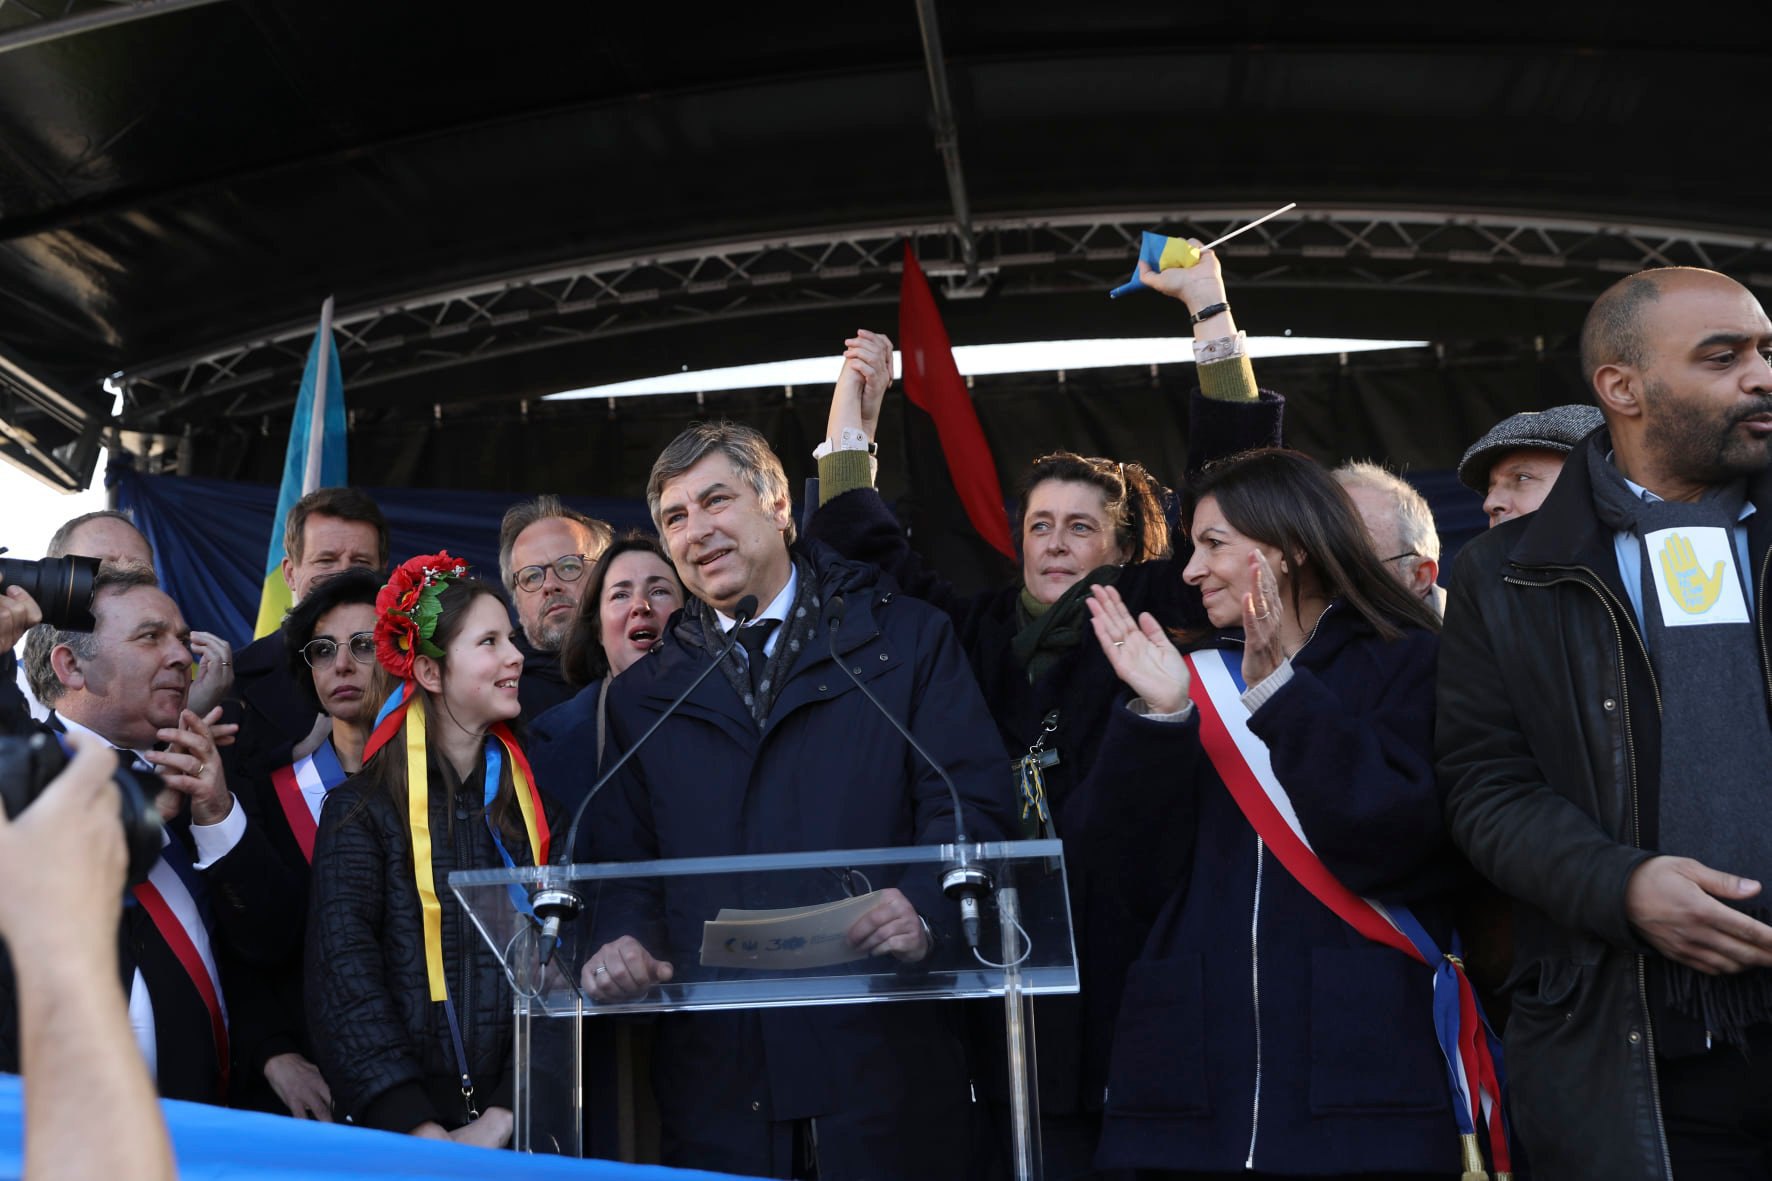 Ukraine's Ambassador to France Vadym Omelchenko during a protest march against the invasion of Ukraine by Russian troops, Paris, 5 March 2022